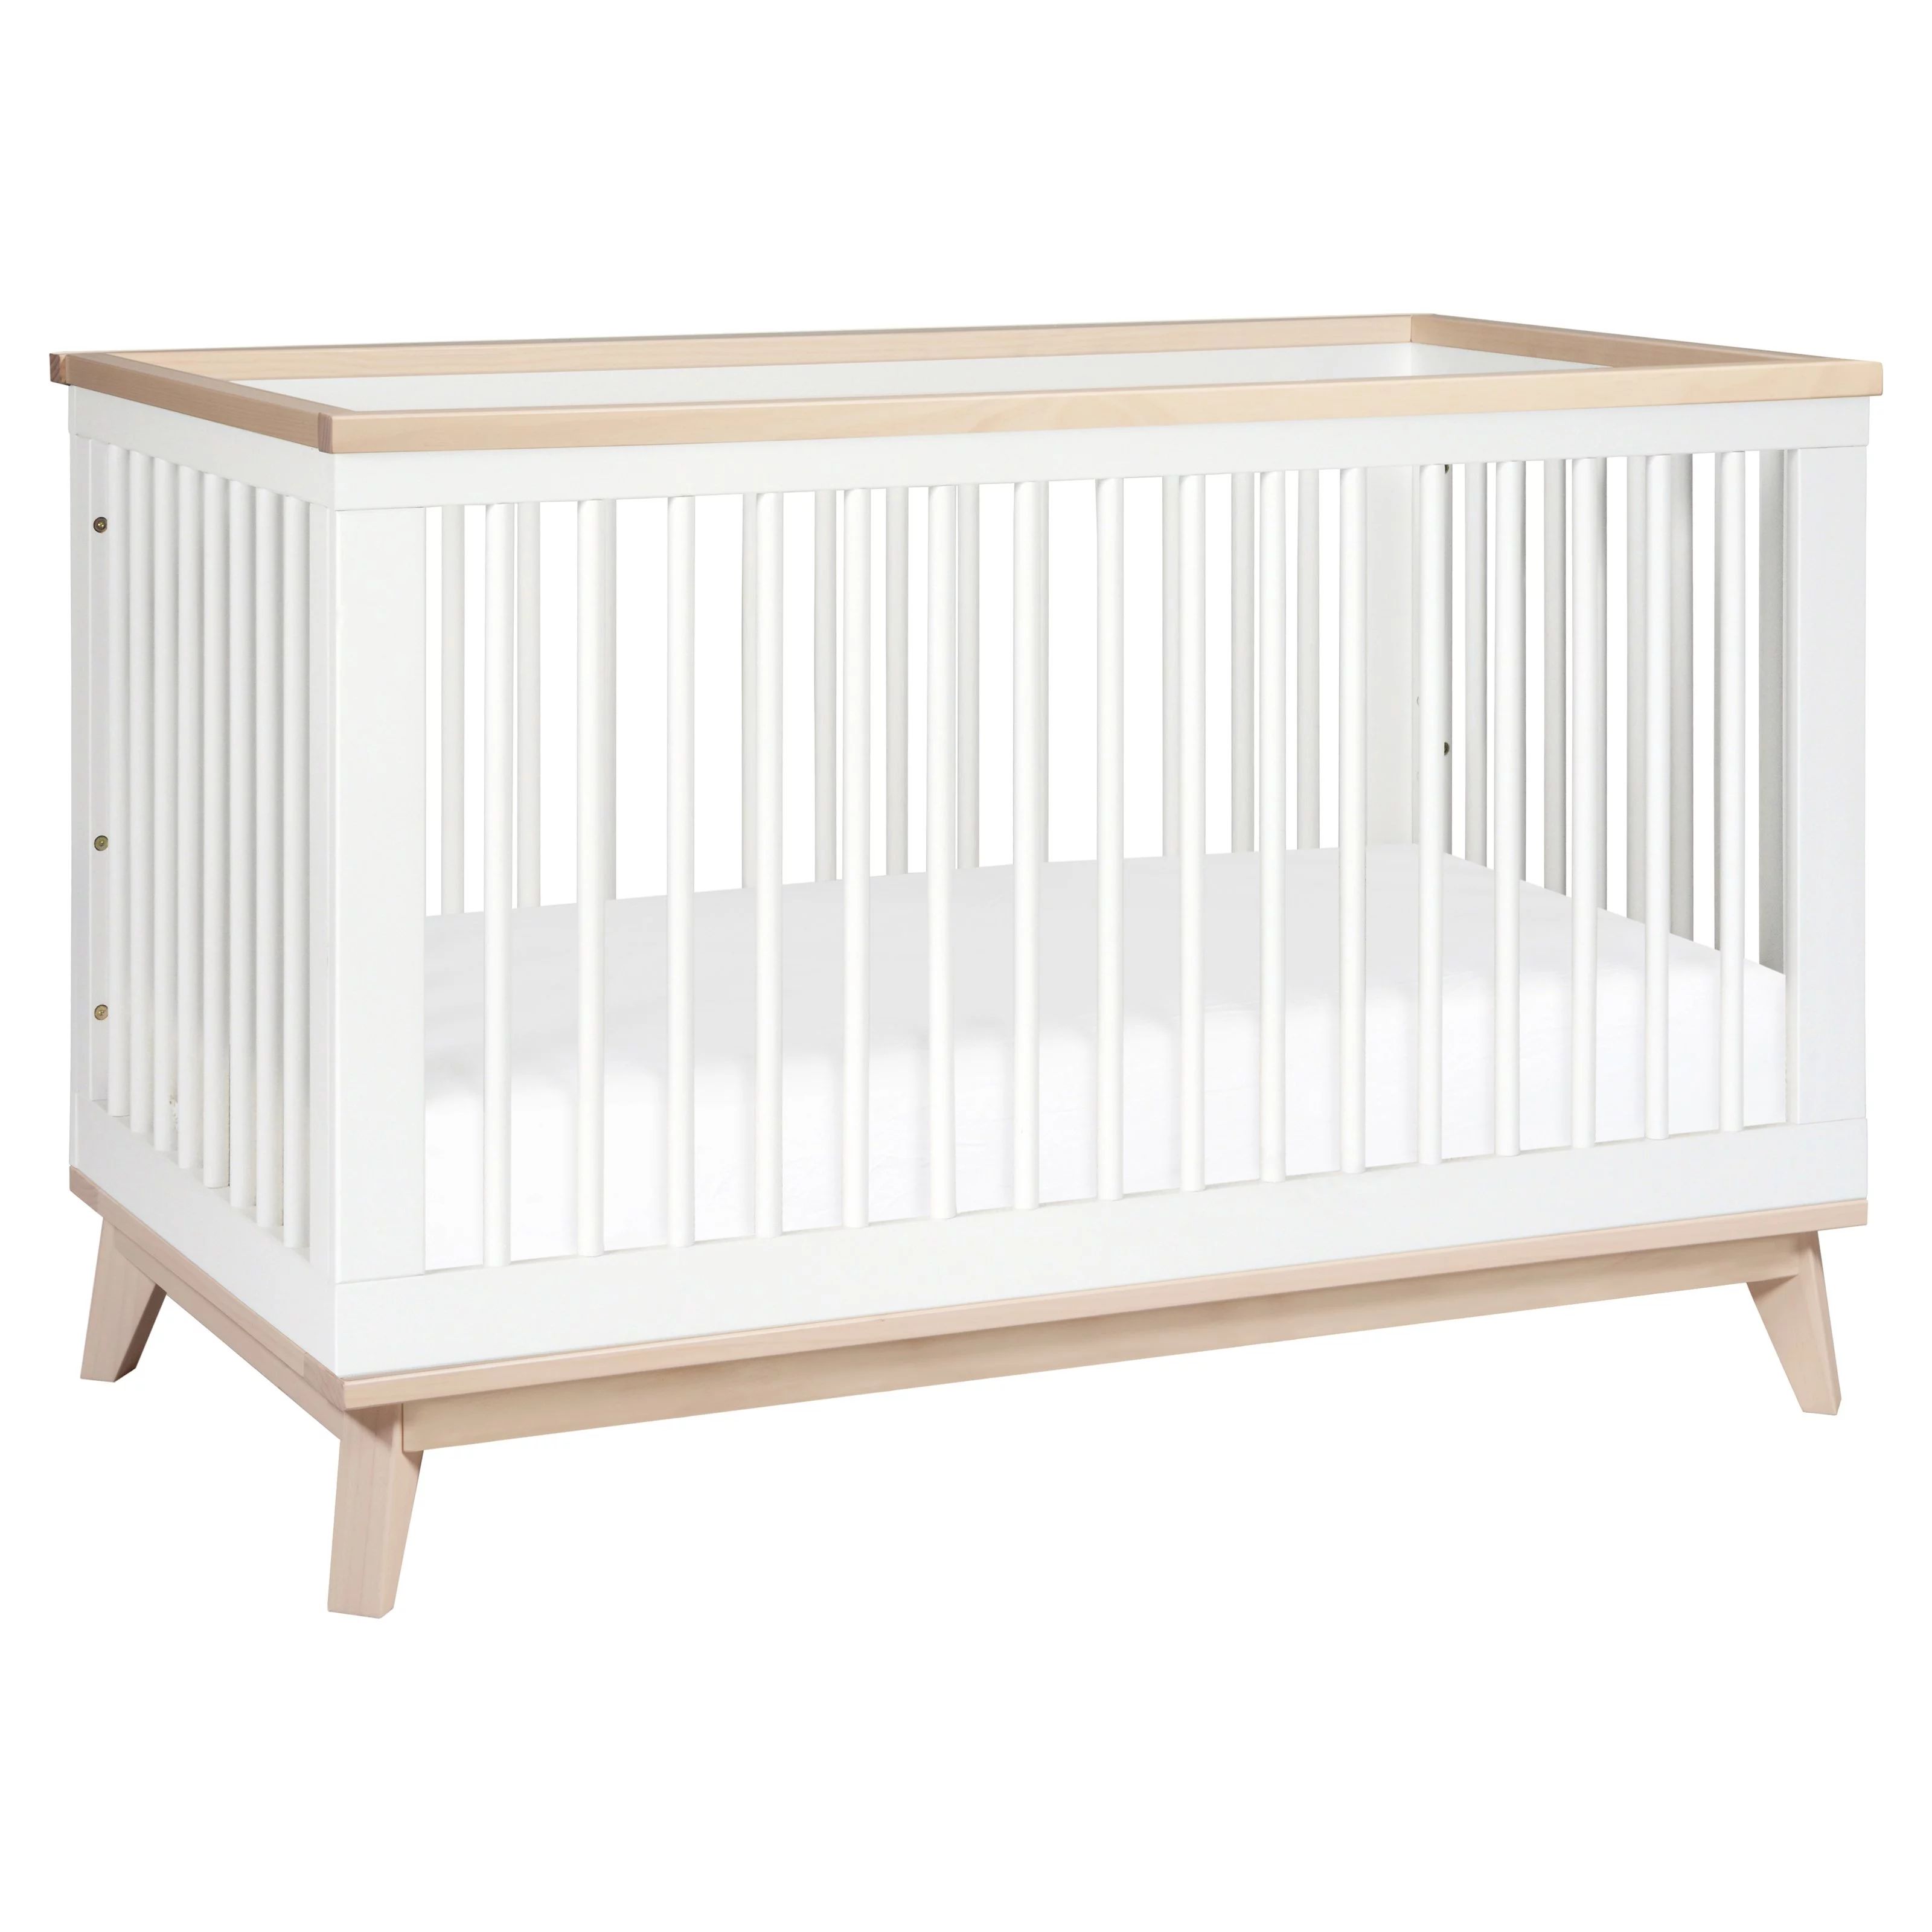 Babyletto Scoot 3-in-1 Convertible Crib with Toddler Rail in White/Washed Natural | Walmart (US)